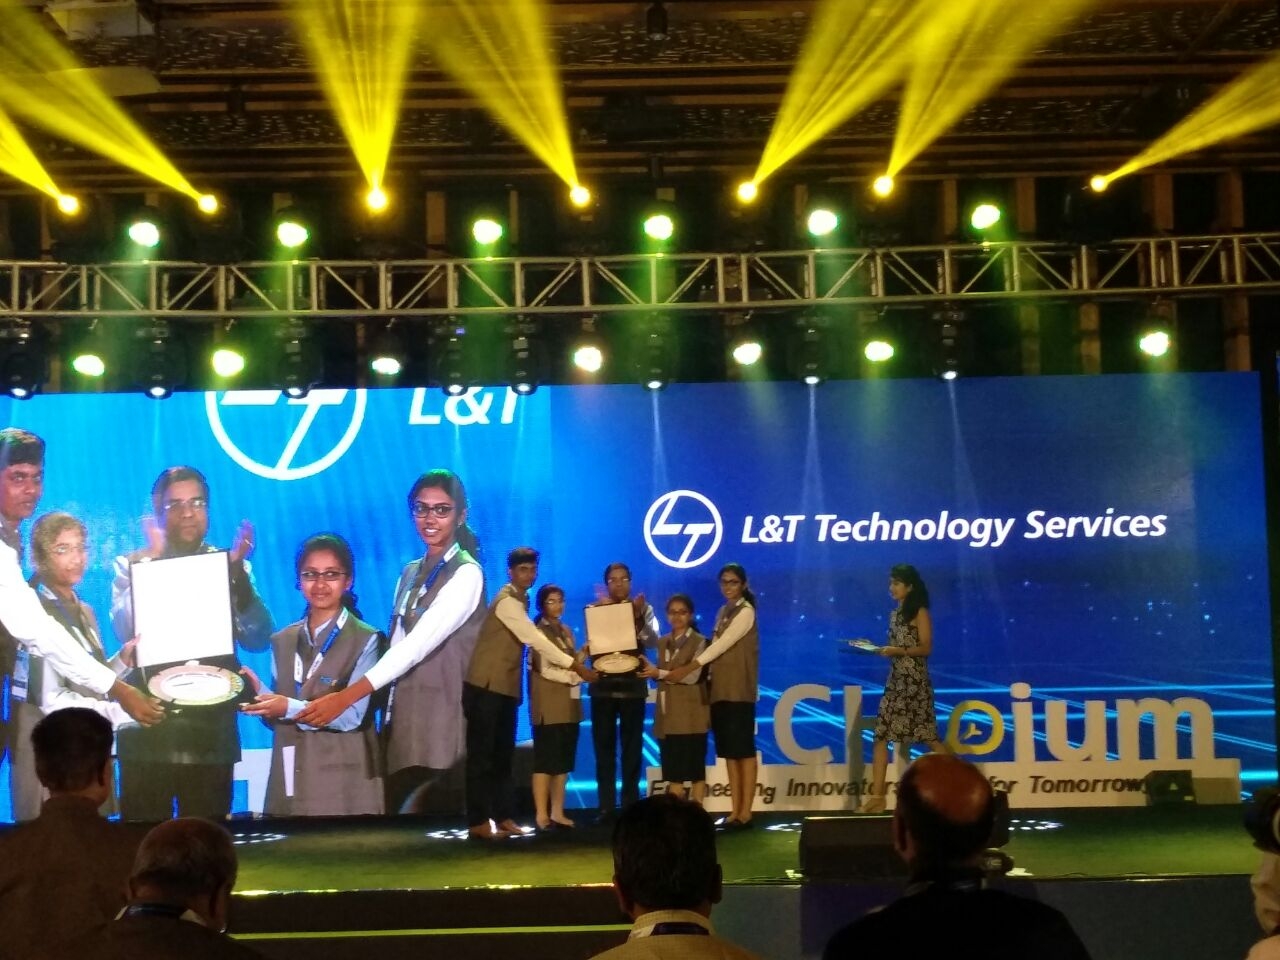 National award – winner of the Gold Medal in the Open Innovation Contest –TECHgium organized by L&T Technology Services.